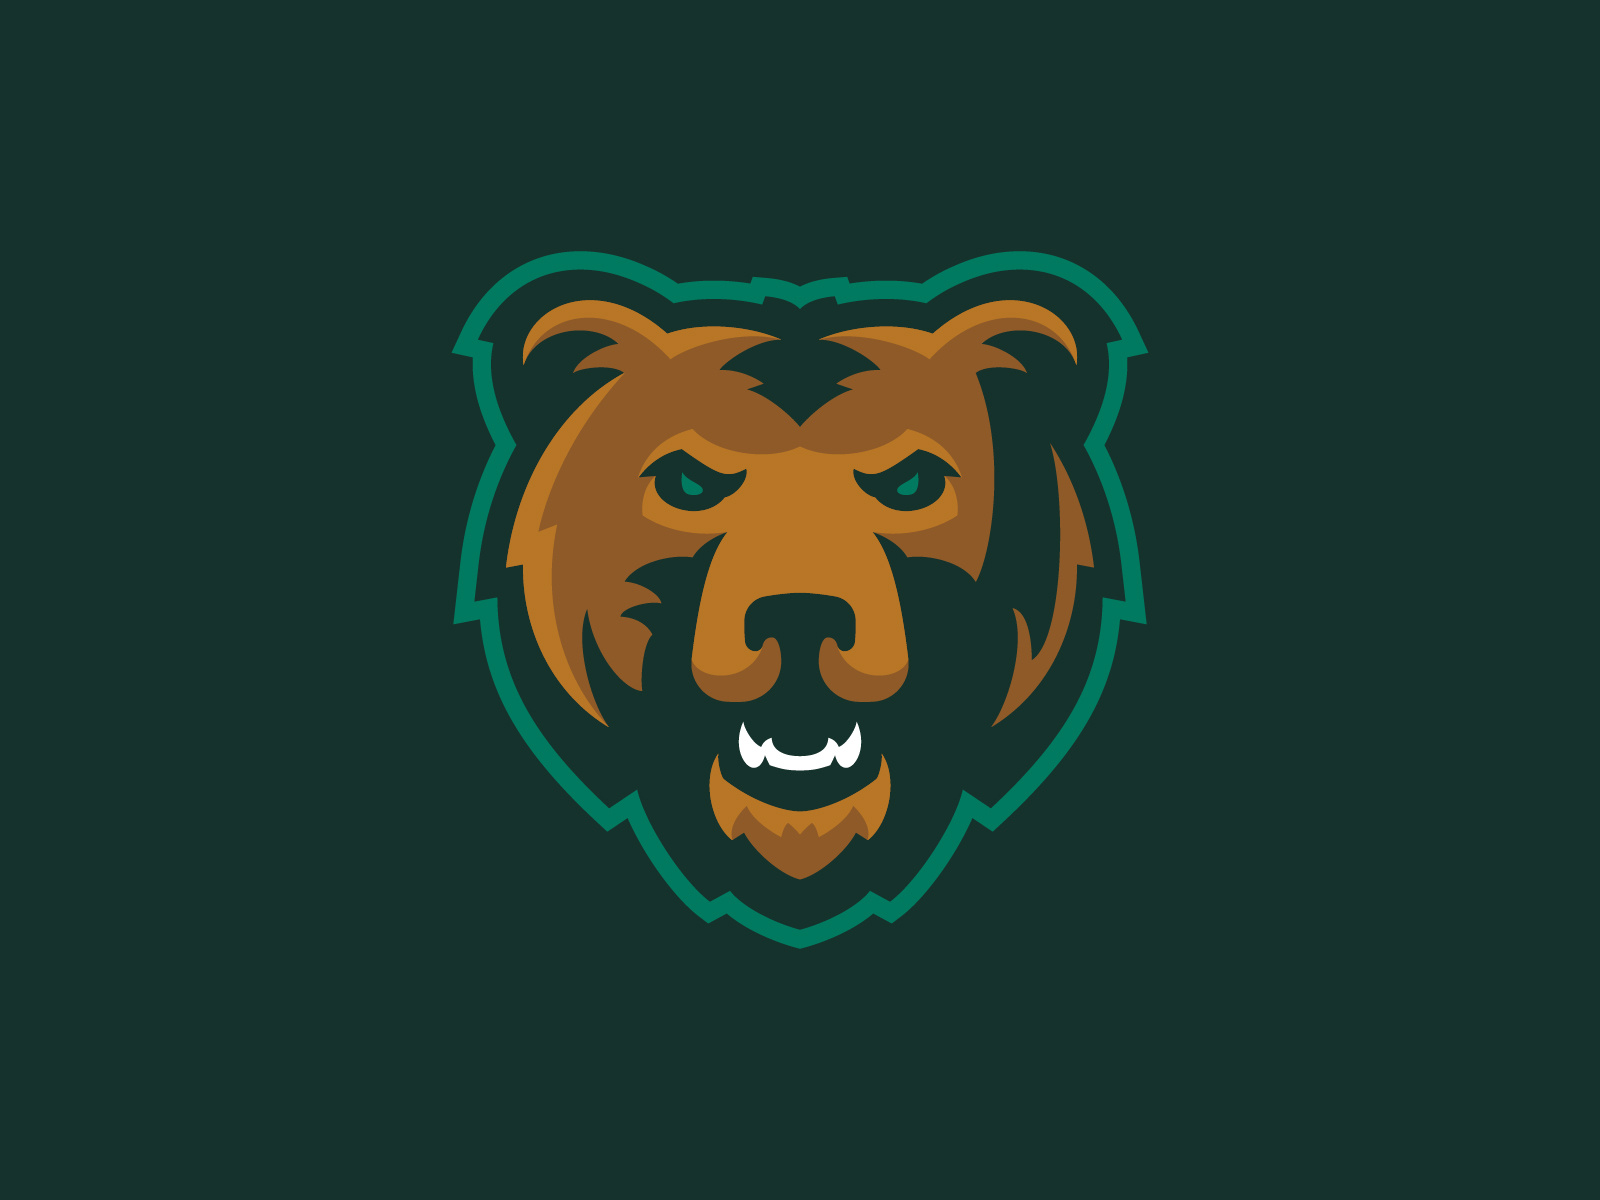 Richland County Bears by Matthew Doyle on Dribbble